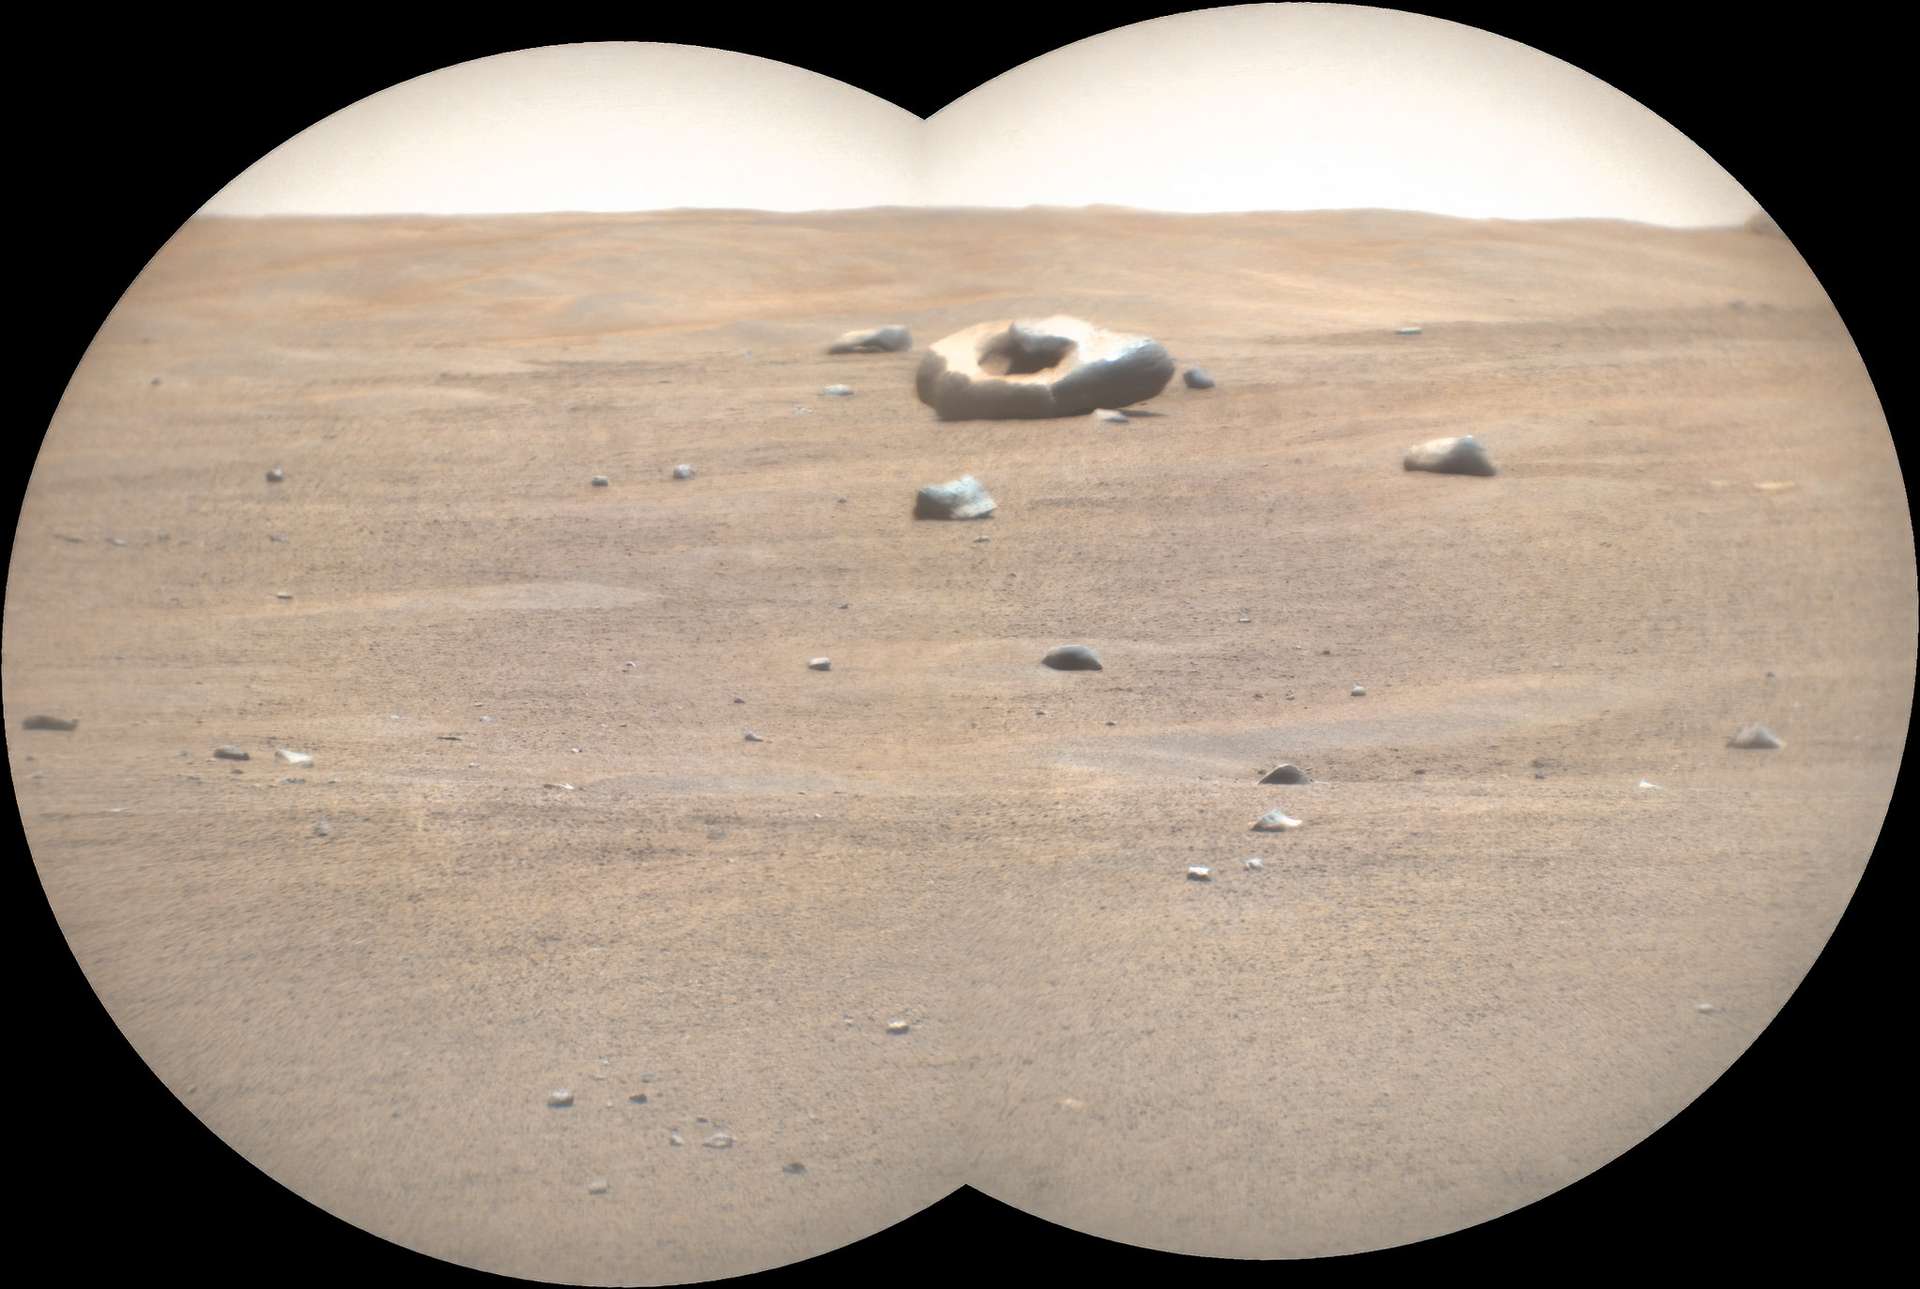 Perseverance has once again encountered a UFO on Mars!